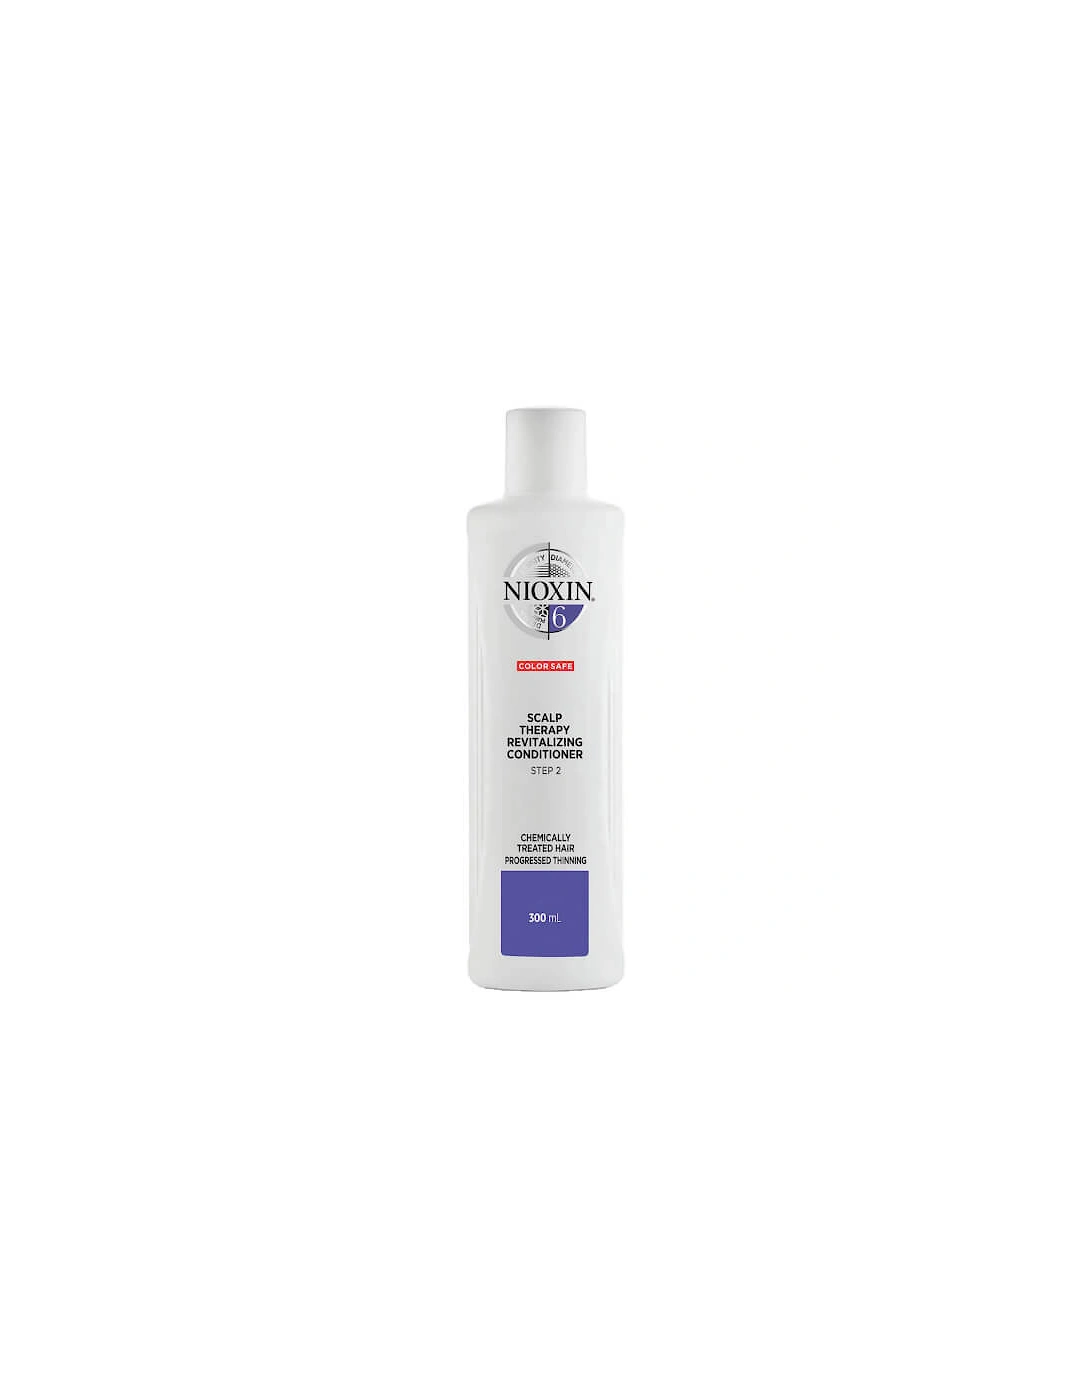 3-Part System 6 Scalp Therapy Revitalising Conditioner for Chemically Treated Hair with Progressed Thinning 300ml, 2 of 1